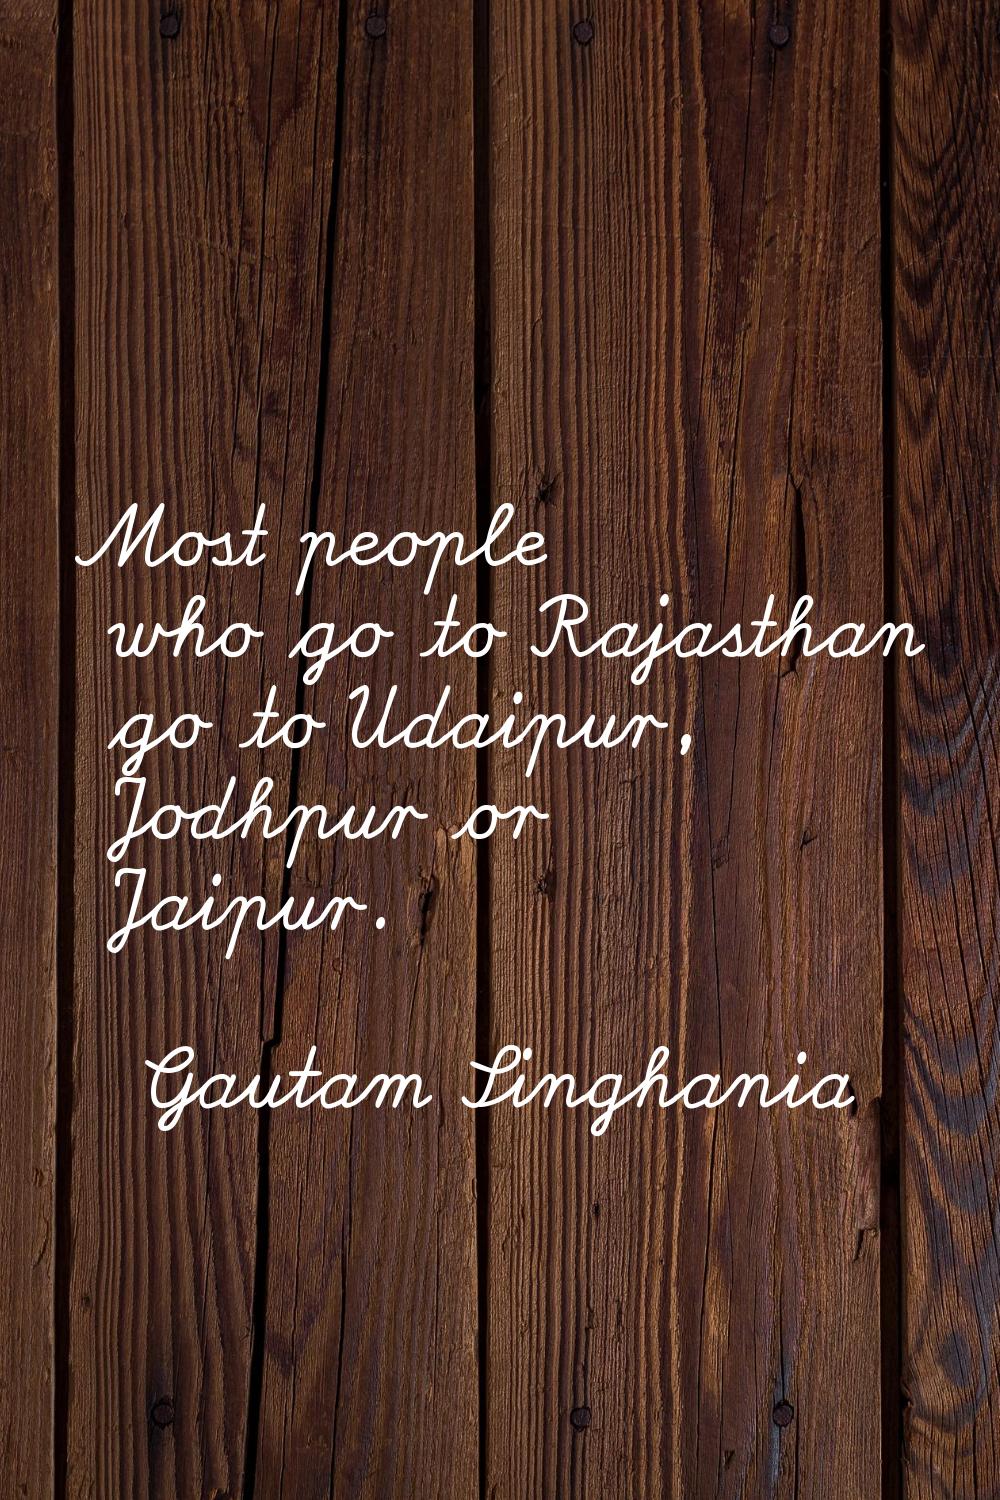 Most people who go to Rajasthan go to Udaipur, Jodhpur or Jaipur.